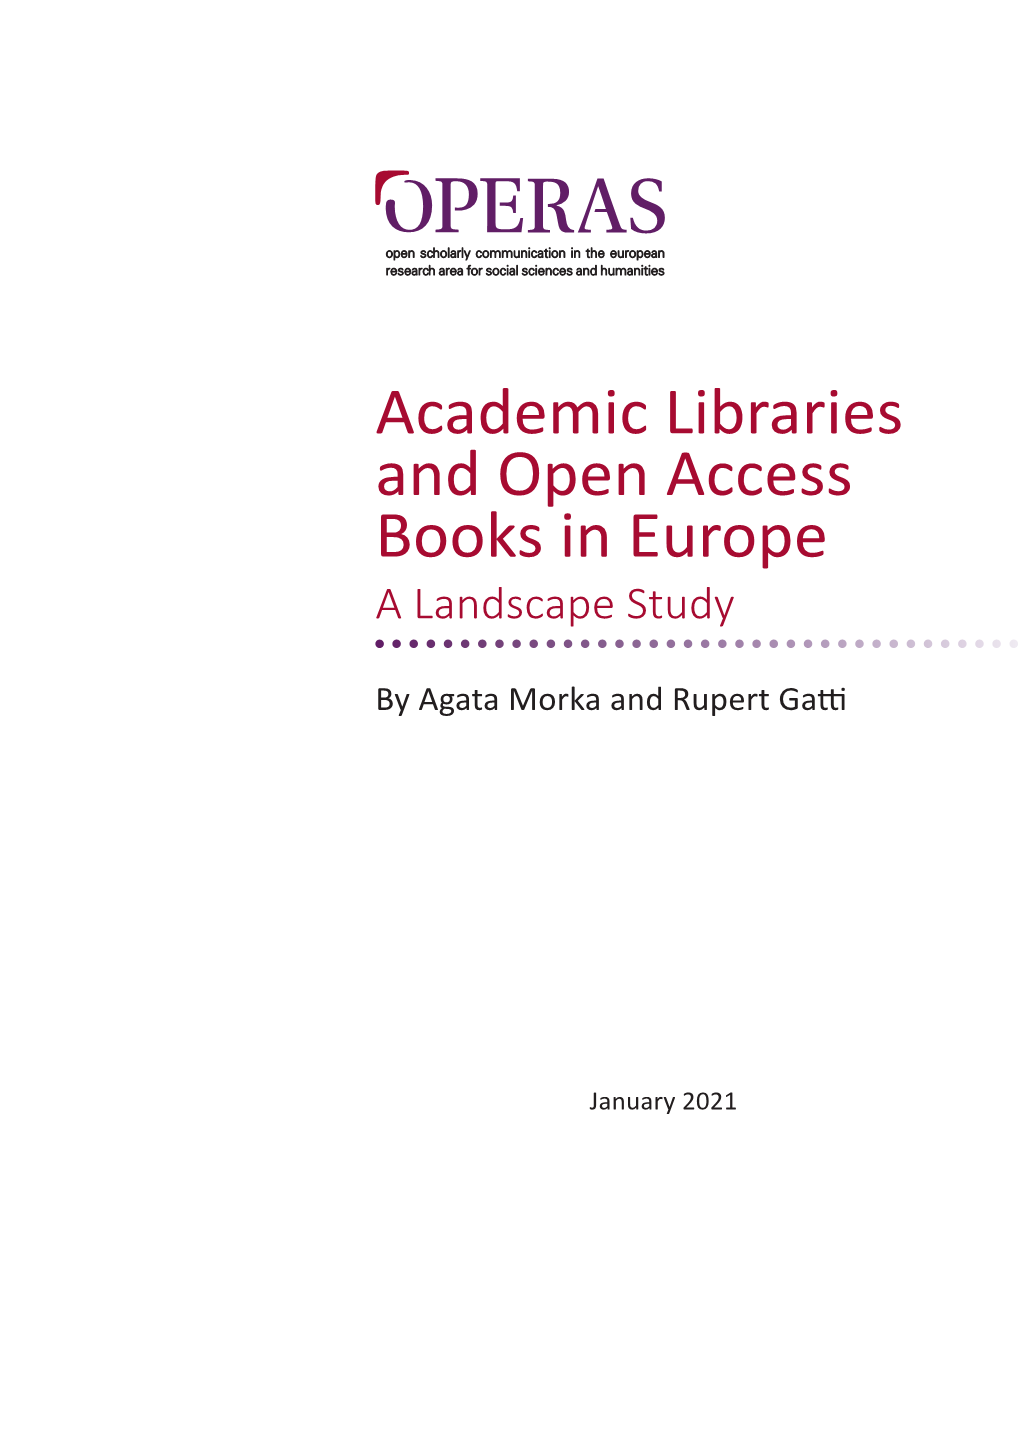 Academic Libraries and Open Access Books in Europe a Landscape Study